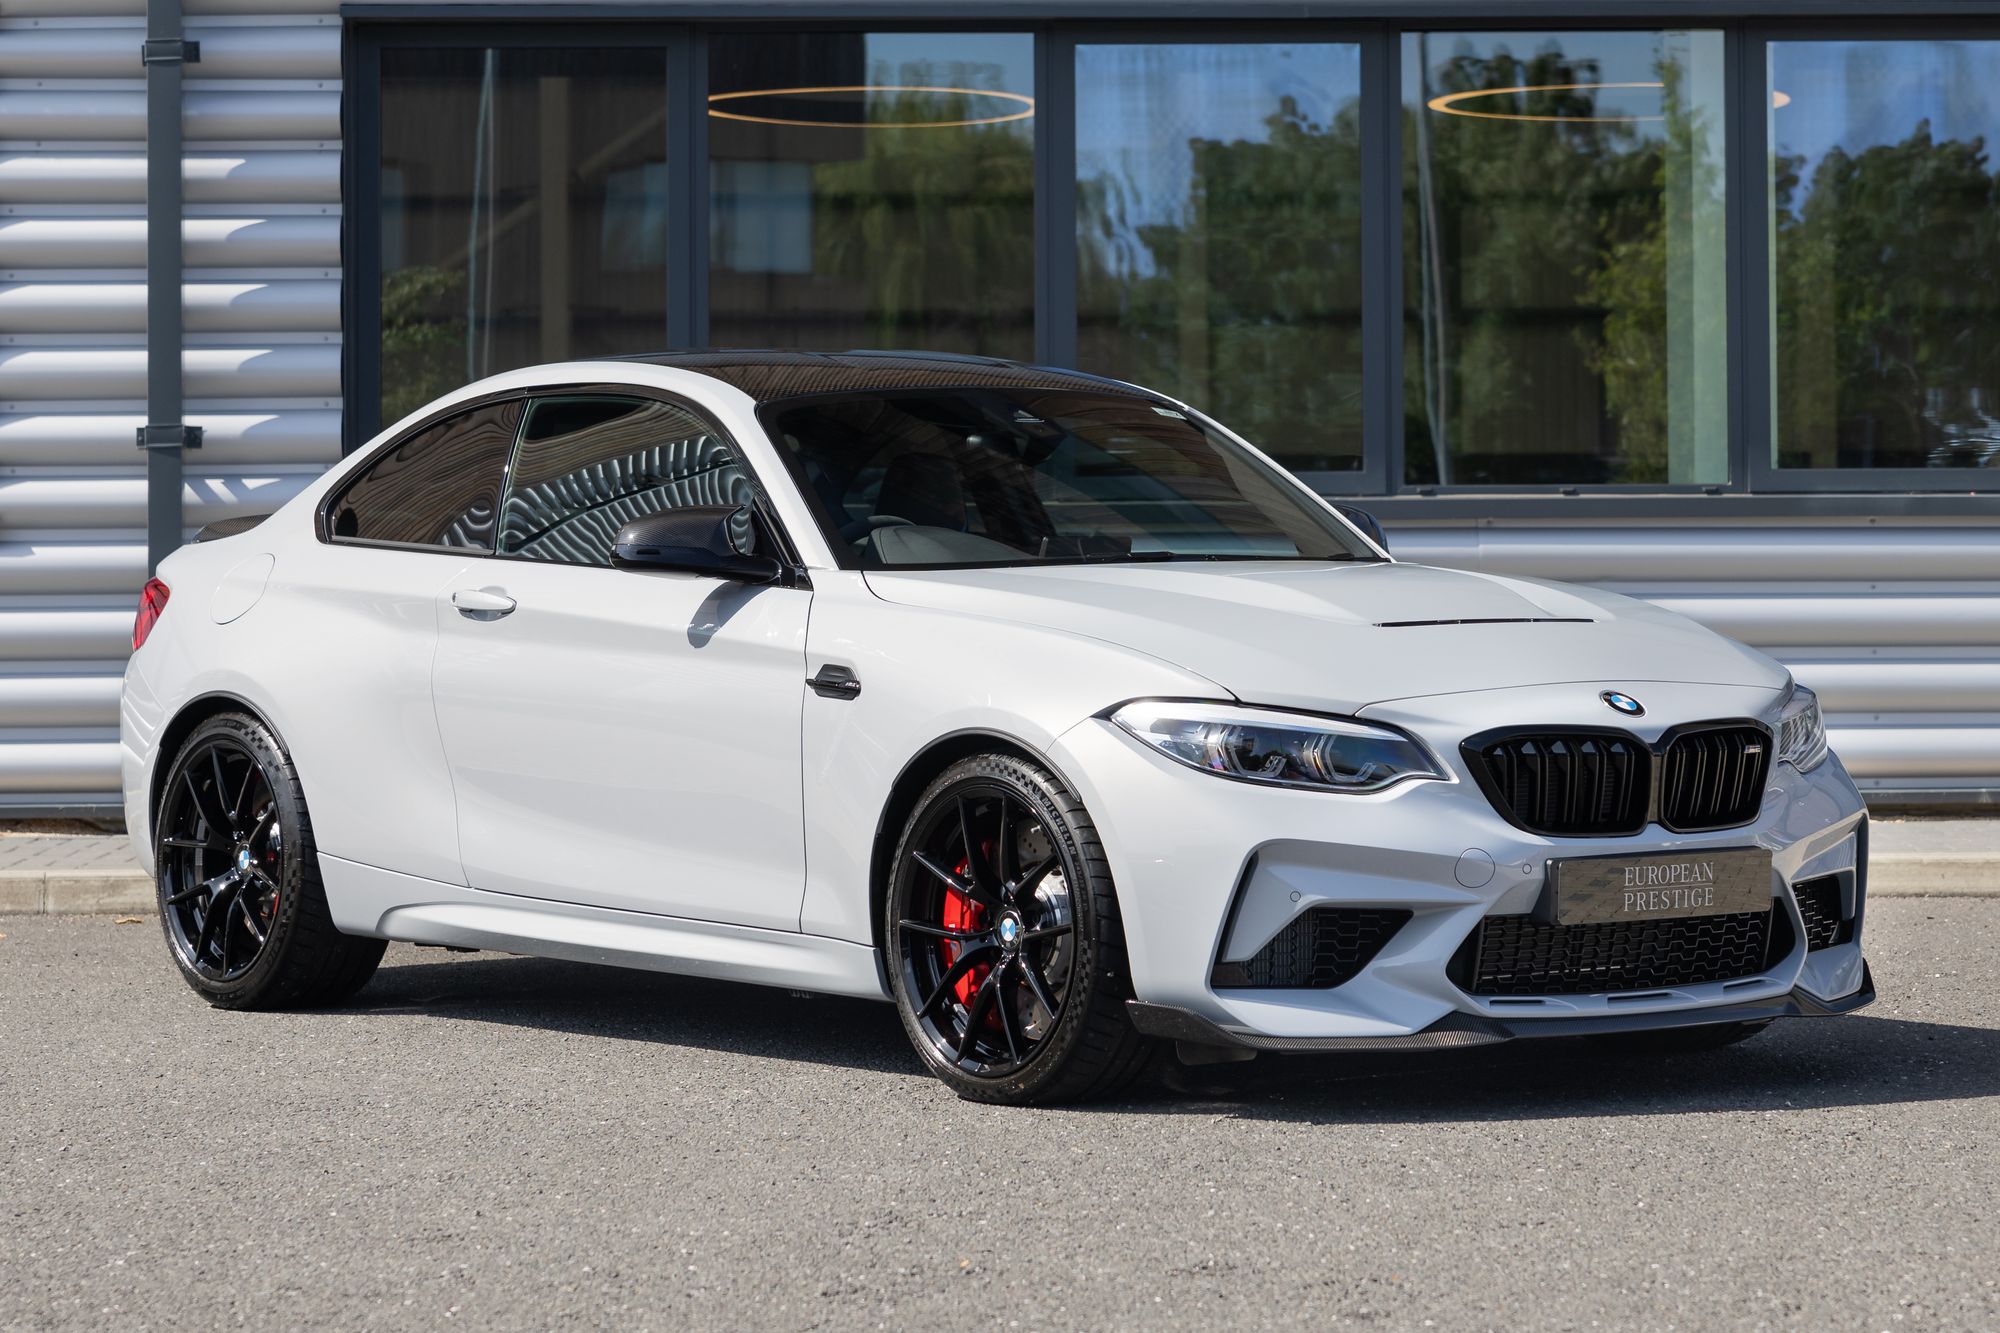 2020 BMW M2 CS for sale by auction in Lincoln, Lincolnshire, United Kingdom